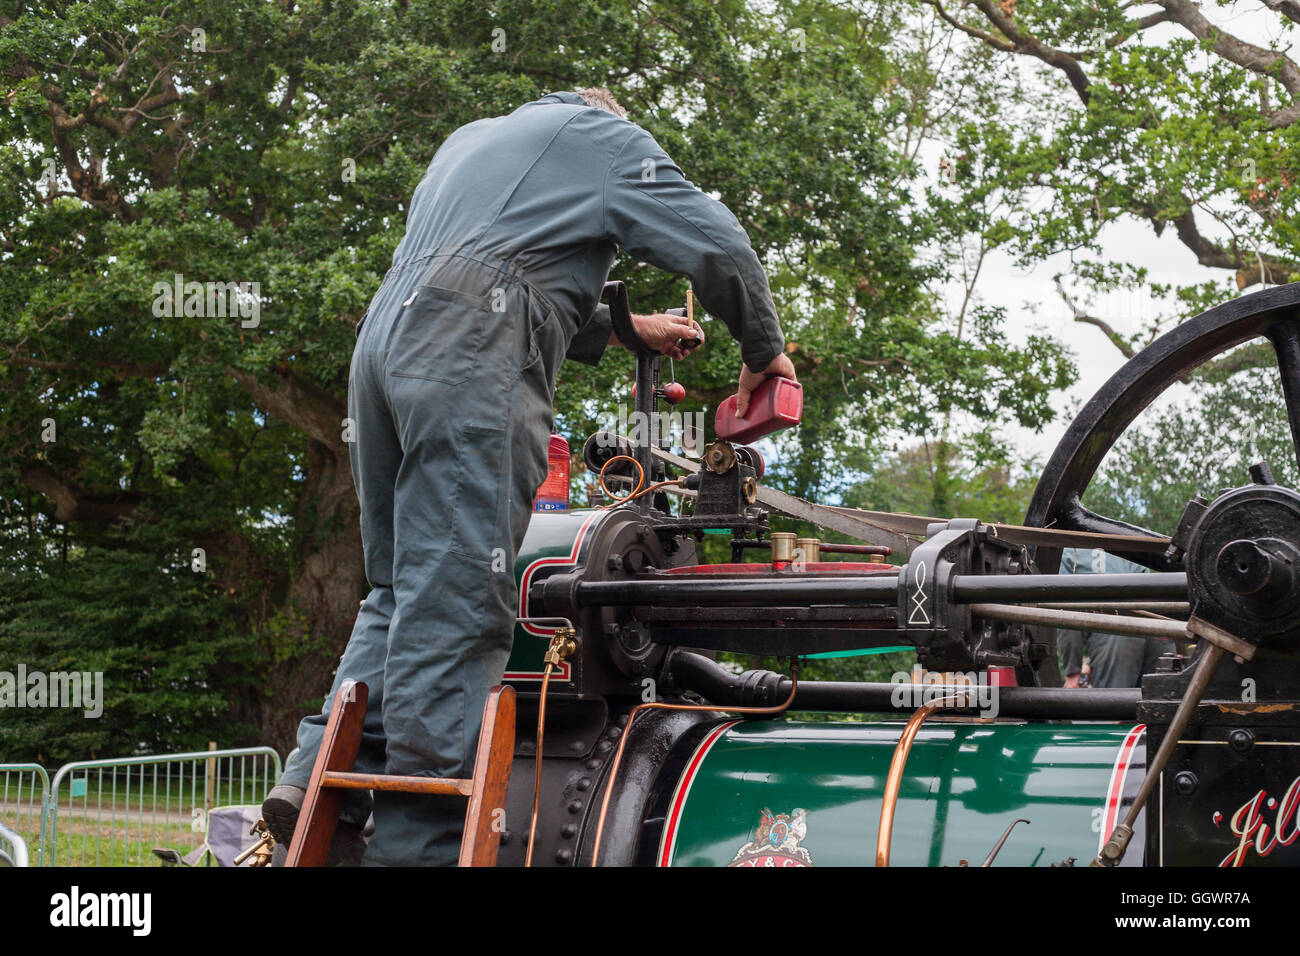 BOCONNOC, CORNWALL, ENGLAND, UK - JULY 31, 2016: Man Pouring Oil into Old Industrial Steam Engine. Historic Heritage Concept. Stock Photo